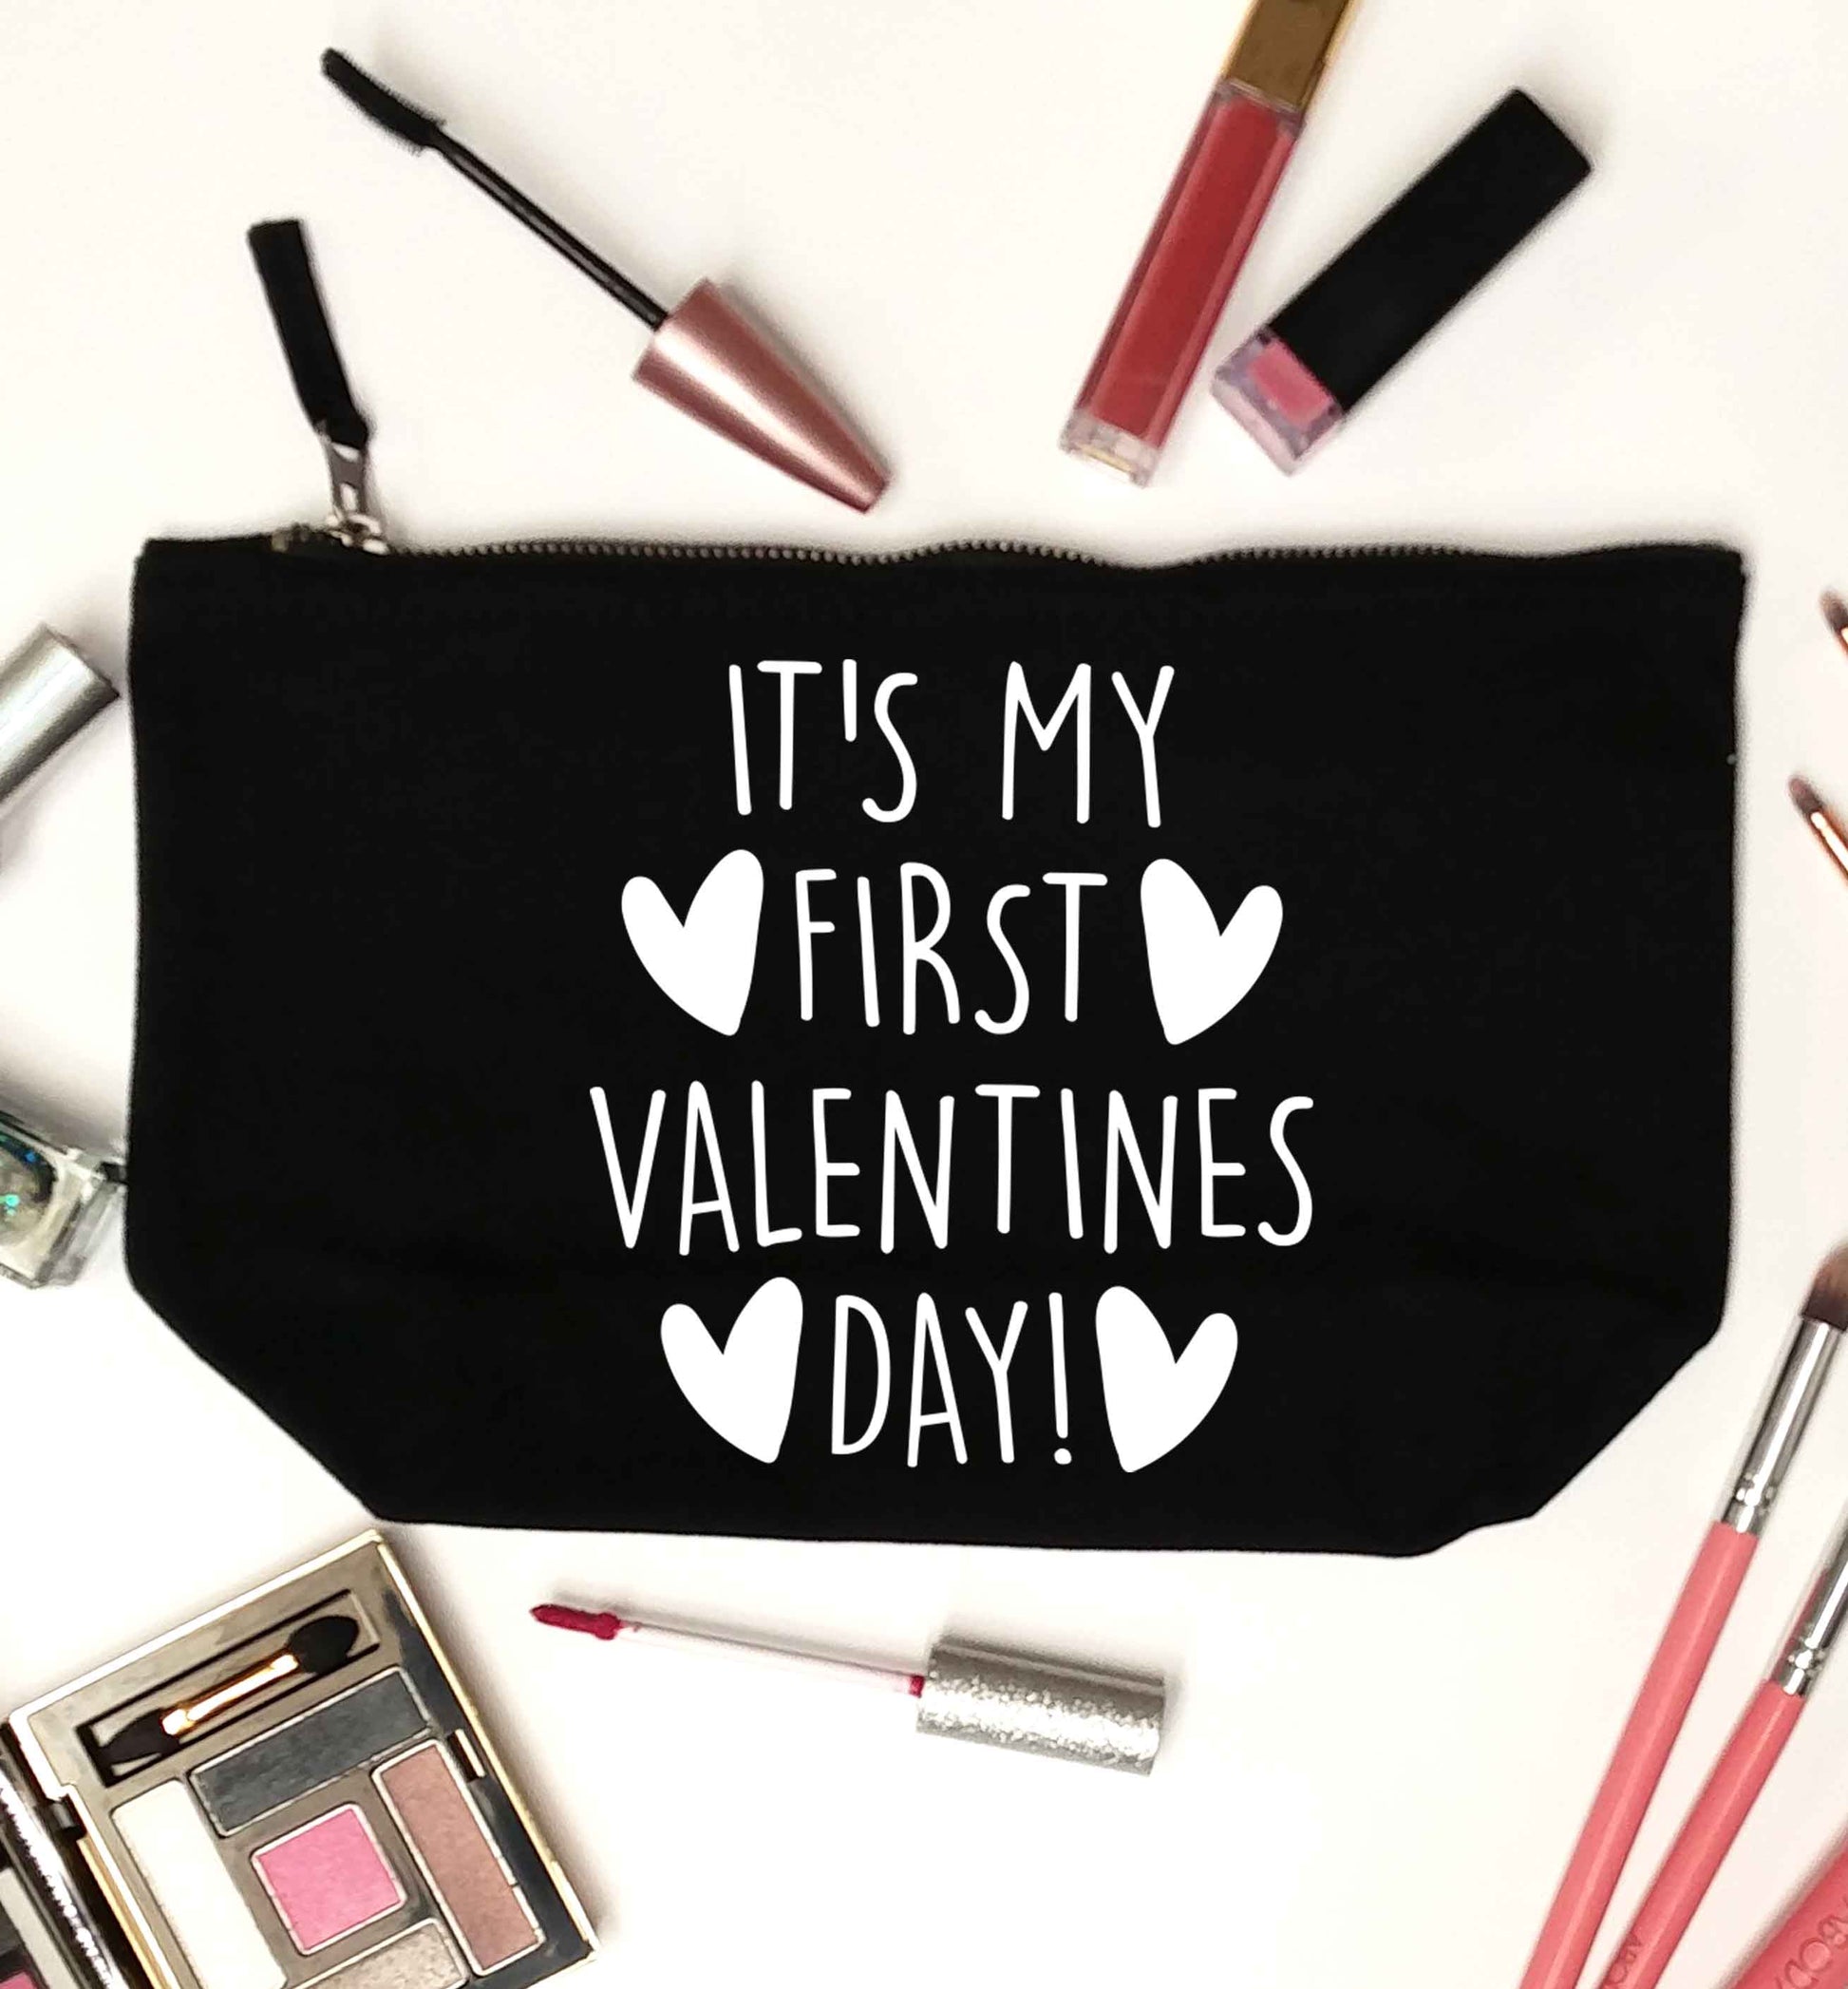 It's my first valentines day! black makeup bag